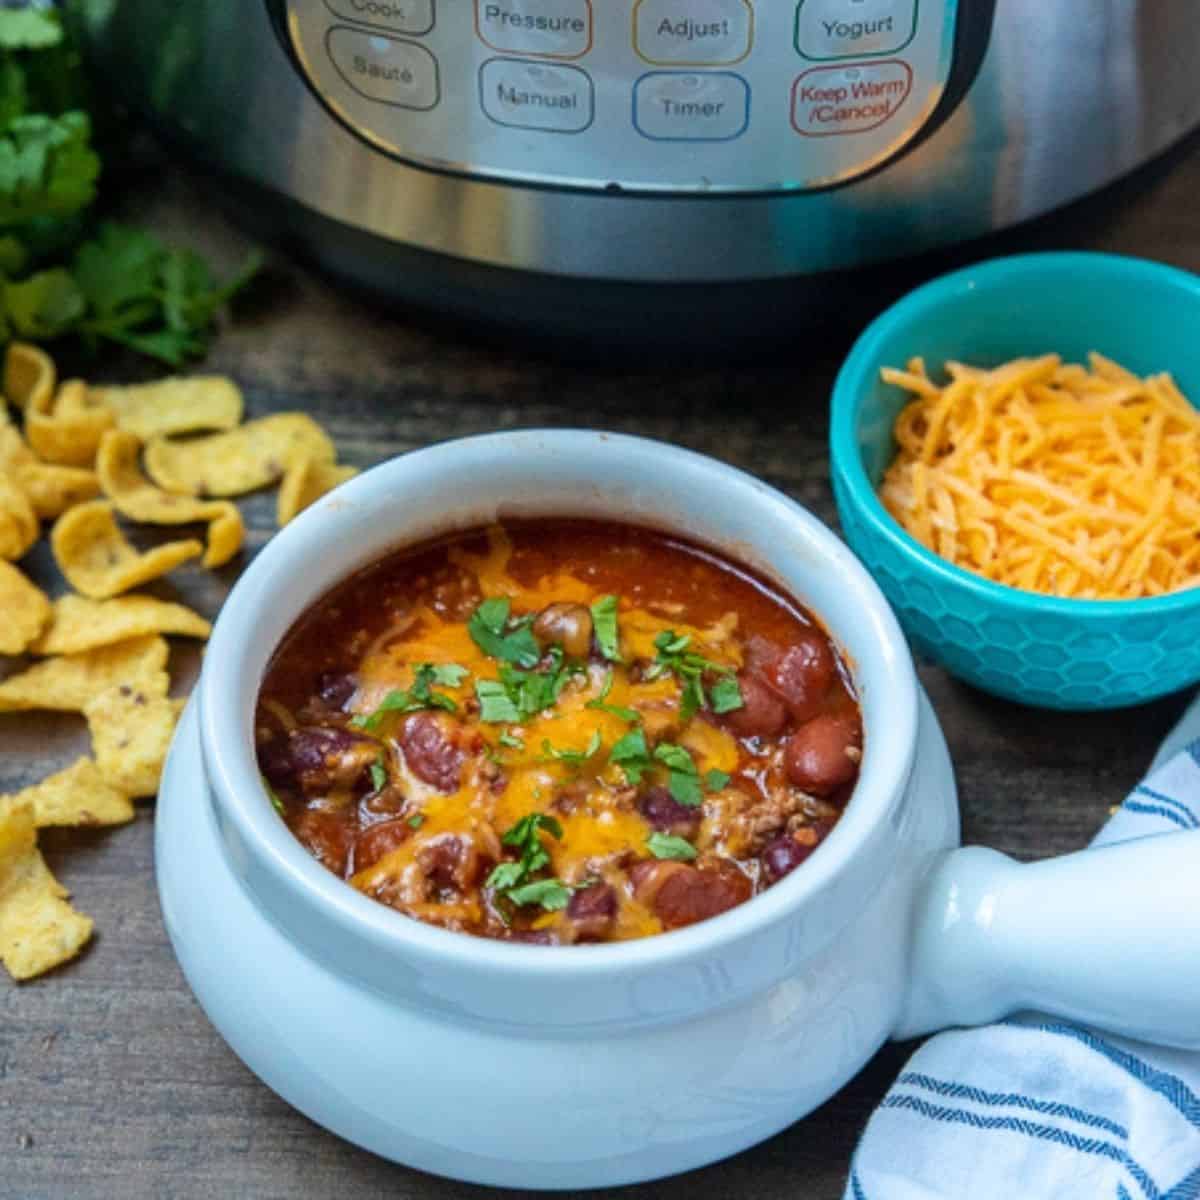 Bowl of chili next to instant pot.